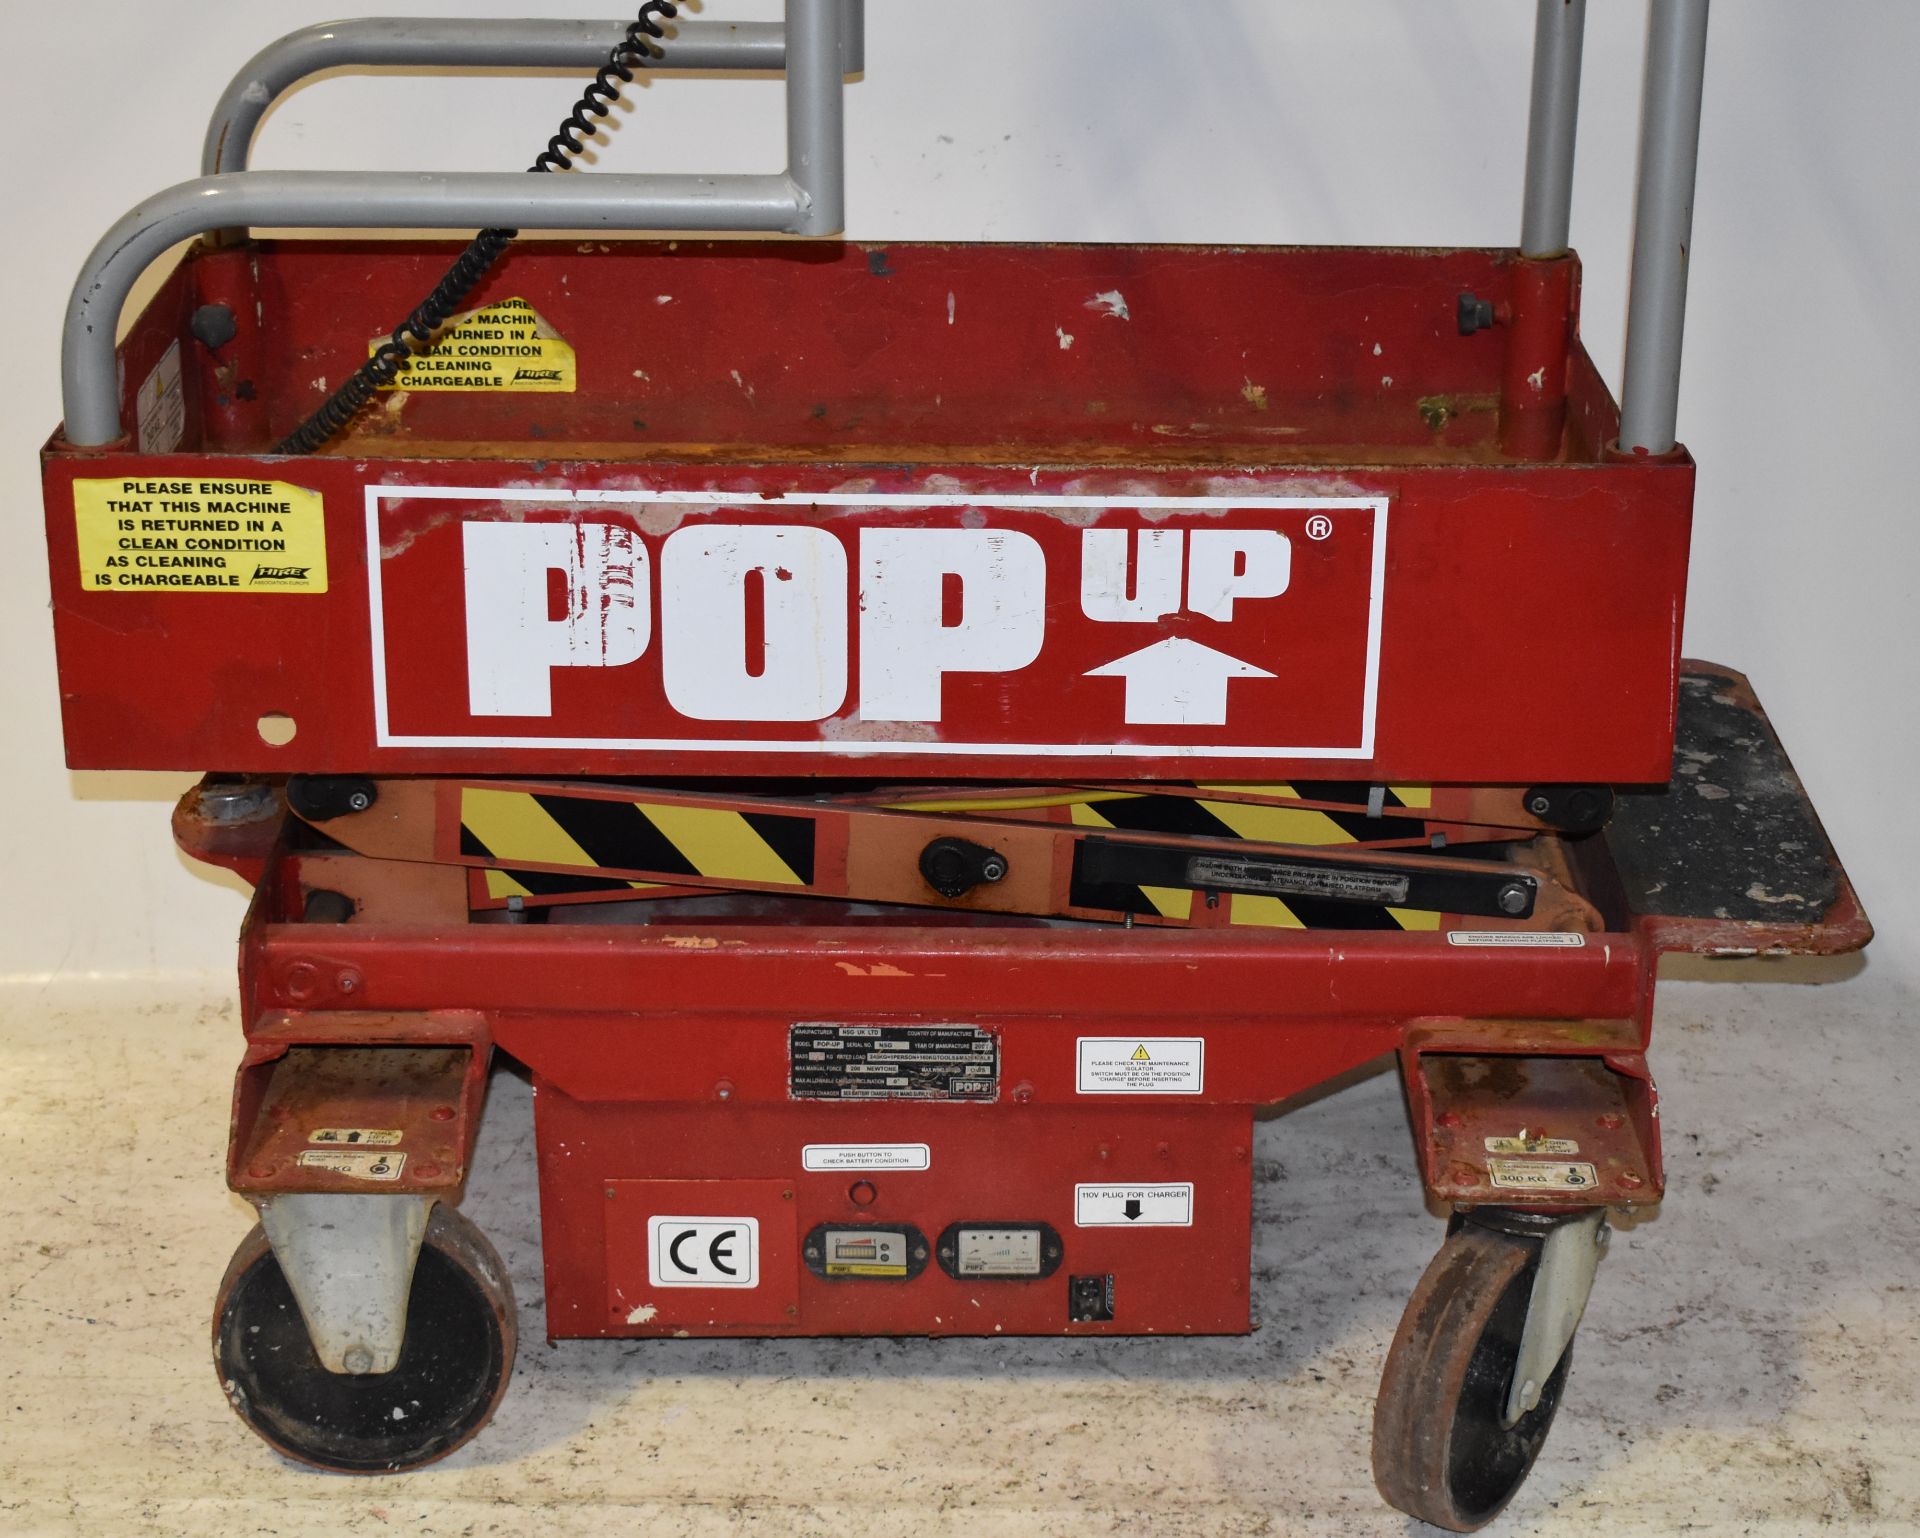 1 x Mobile Pop-Up Scissor Lift - Weight Capacity 300kg - Platform Base Max Height 161 cms - Tested - Image 4 of 9